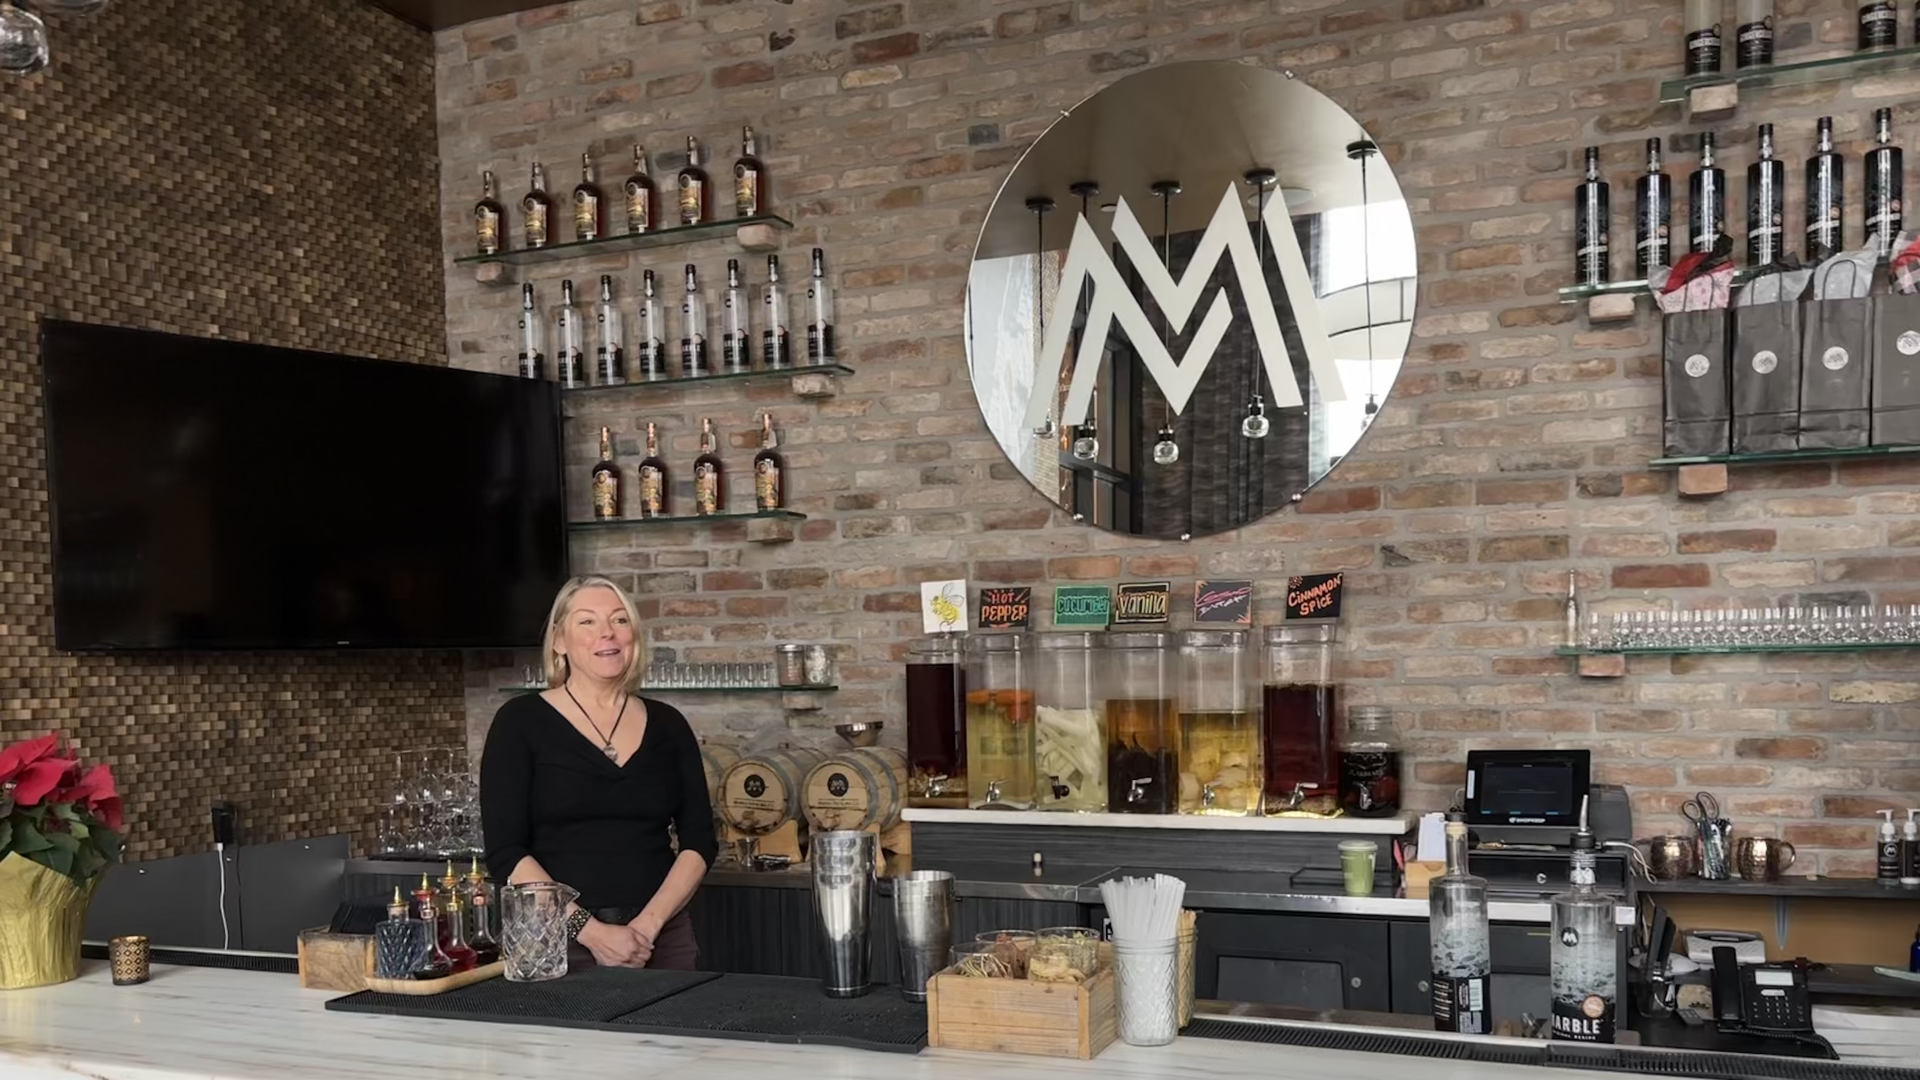 Connie Baker at the Marble Distilling bar in Carbondale. Photo: John Frank/Axios